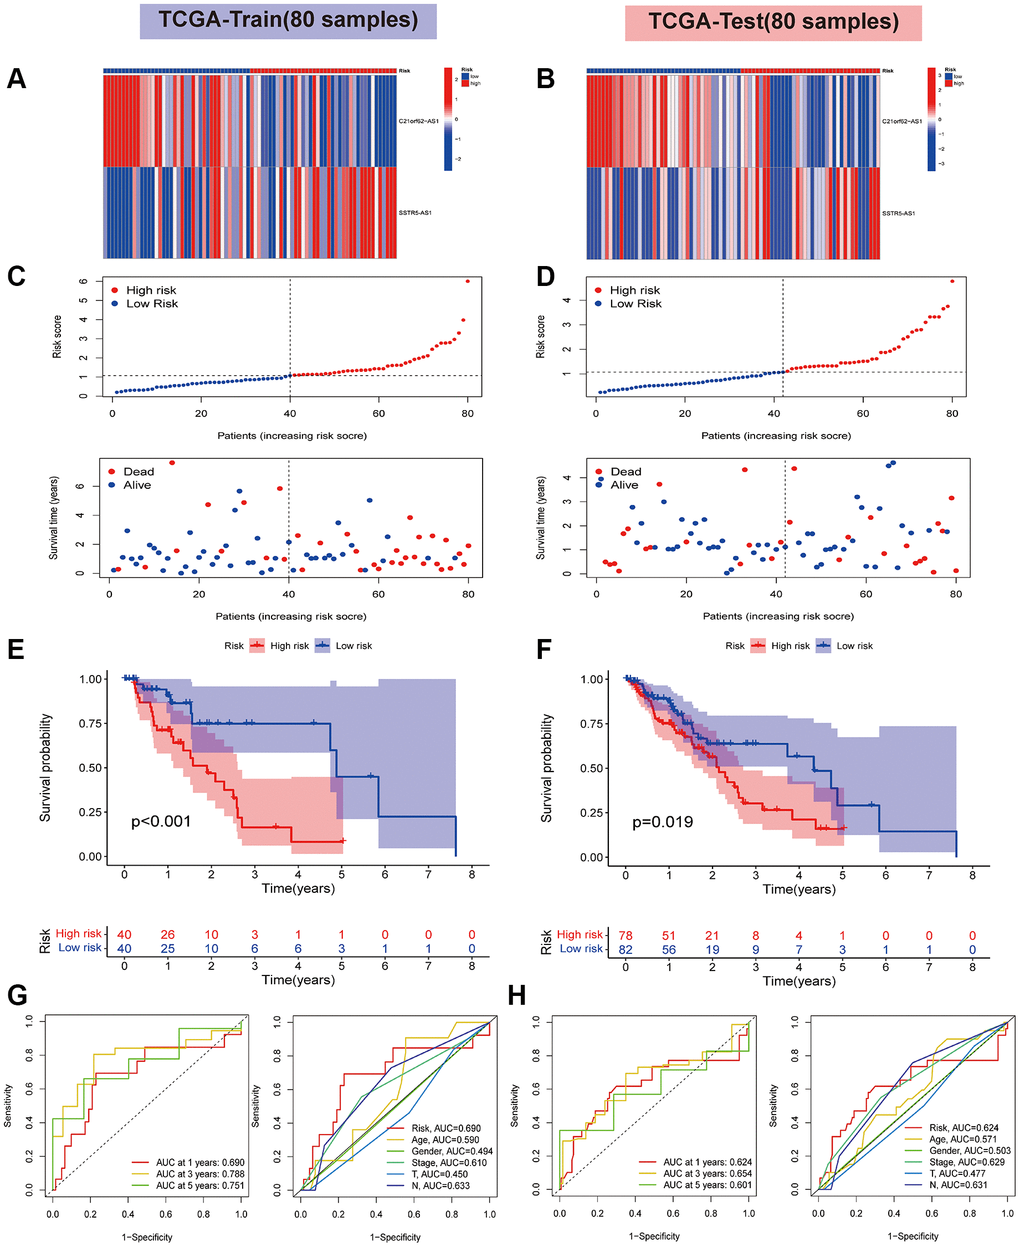 Validation of risk signature based on two HARlncRNAs in the TCGA cohort. (A) The heatmaps of prognostic 2 genes signature in the training set. (B) The heatmaps of prognostic 2 genes signature in the test set. (C) Risk score distribution plot showed the distribution of high-risk and low-risk LUAD patients in the training set. Scatter plot showed the correlation between the survival status and risk score of LUAD patients in the training set. (D) Risk score distribution plot showed the distribution of high-risk and low-risk LUAD patients in the test set. Scatter plot showed the correlation between the survival status and risk score of LUAD patients in the test set. The survival analysis in the training set (E) and test set (F). ROC curve analysis of the accuracy of the model to predict patient prognosis at 1, 3, and 5 years in the training (G) and test sets (H).